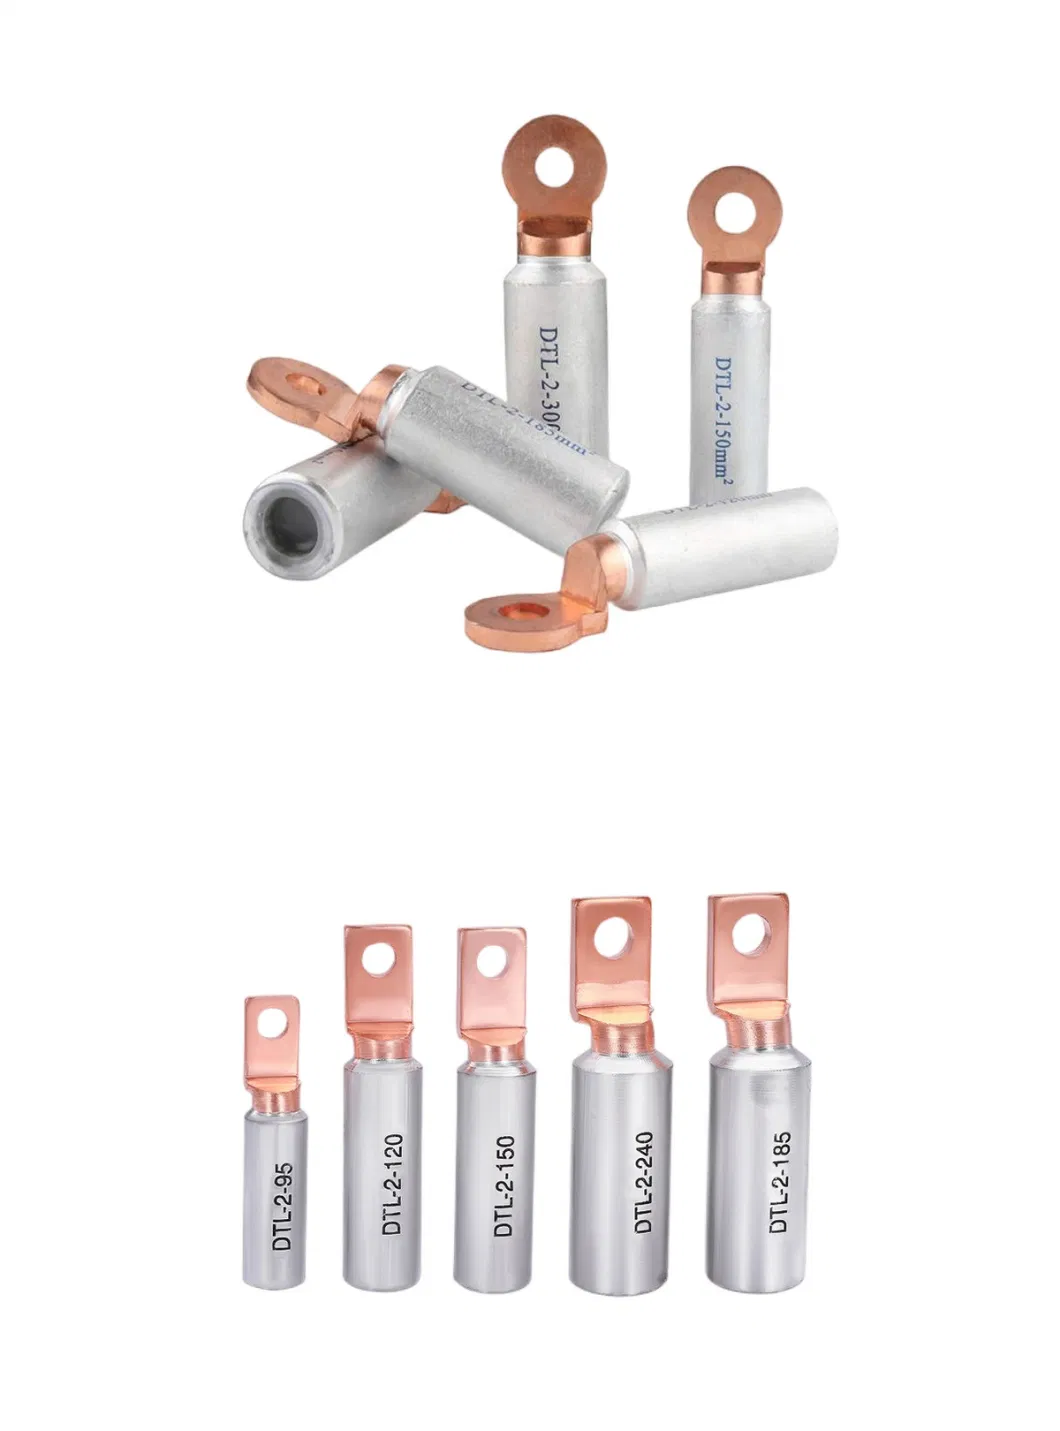 Tinned Copper Crimping Cable Terminal Lug Electrical Battery Tube Ring Crimp Terminal Connectors